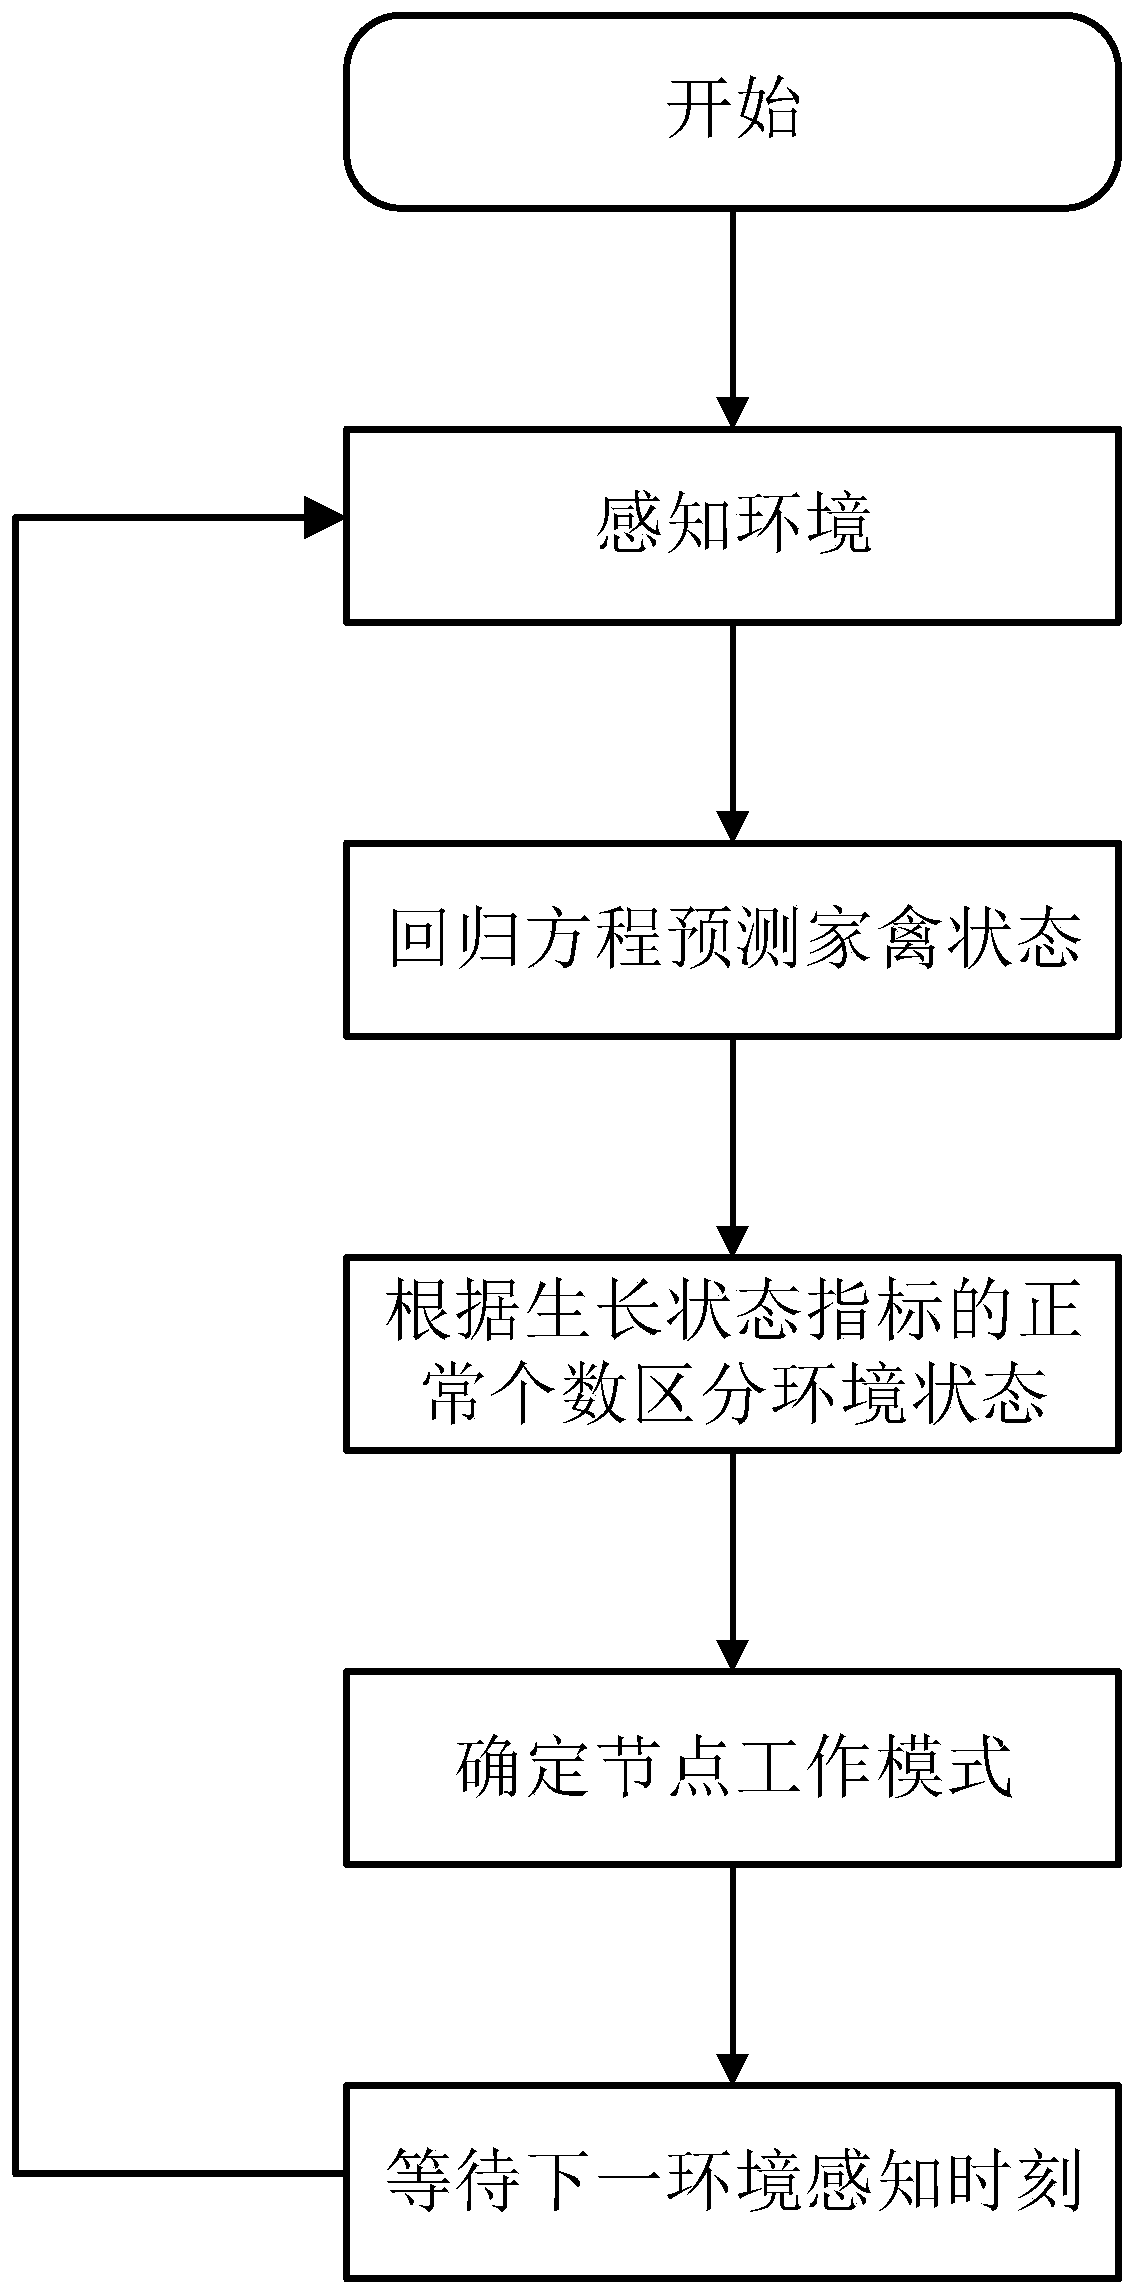 Sending rate adjusting method of poultry farming monitoring wireless sensor network based on environmental perception learning strategy